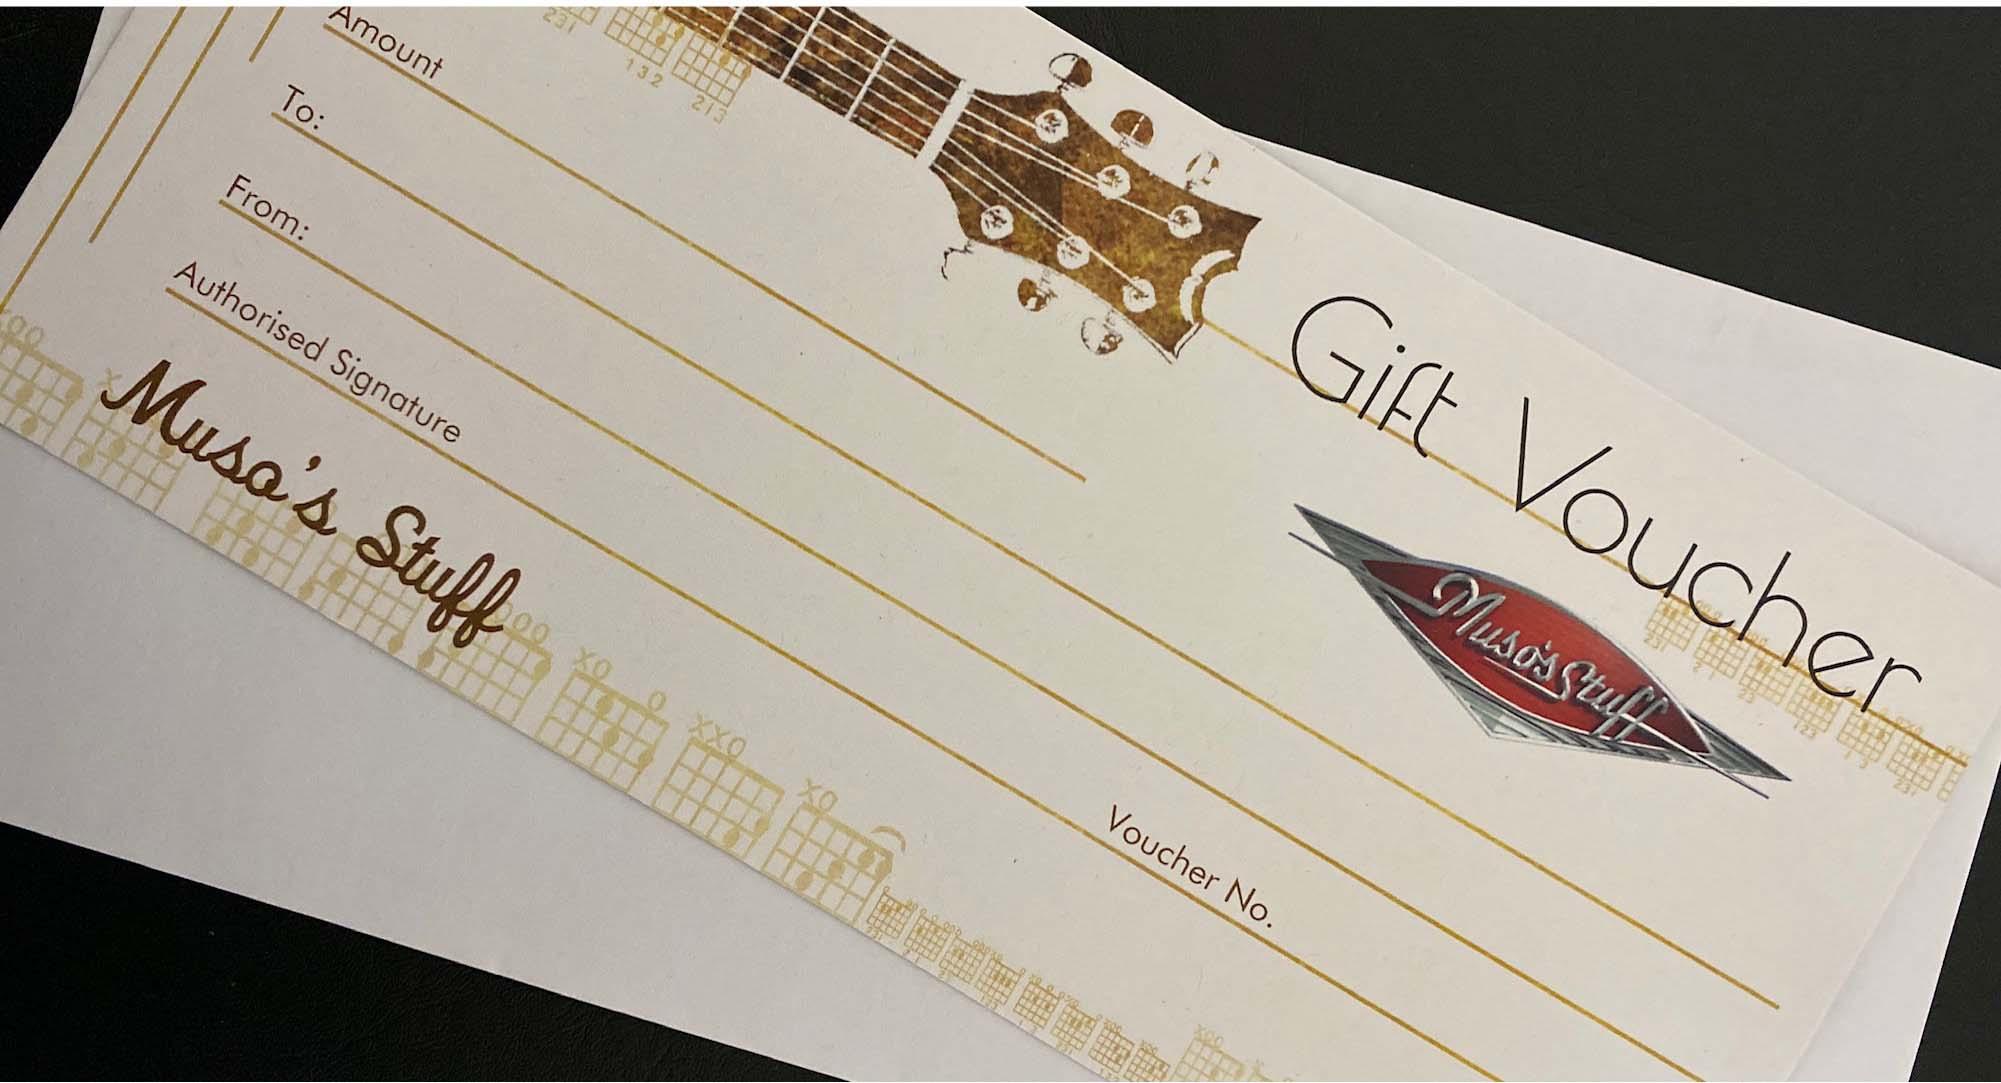 Muso's Stuff Gift Vouchers - Gift Cards by Muso's Stuff at Muso's Stuff